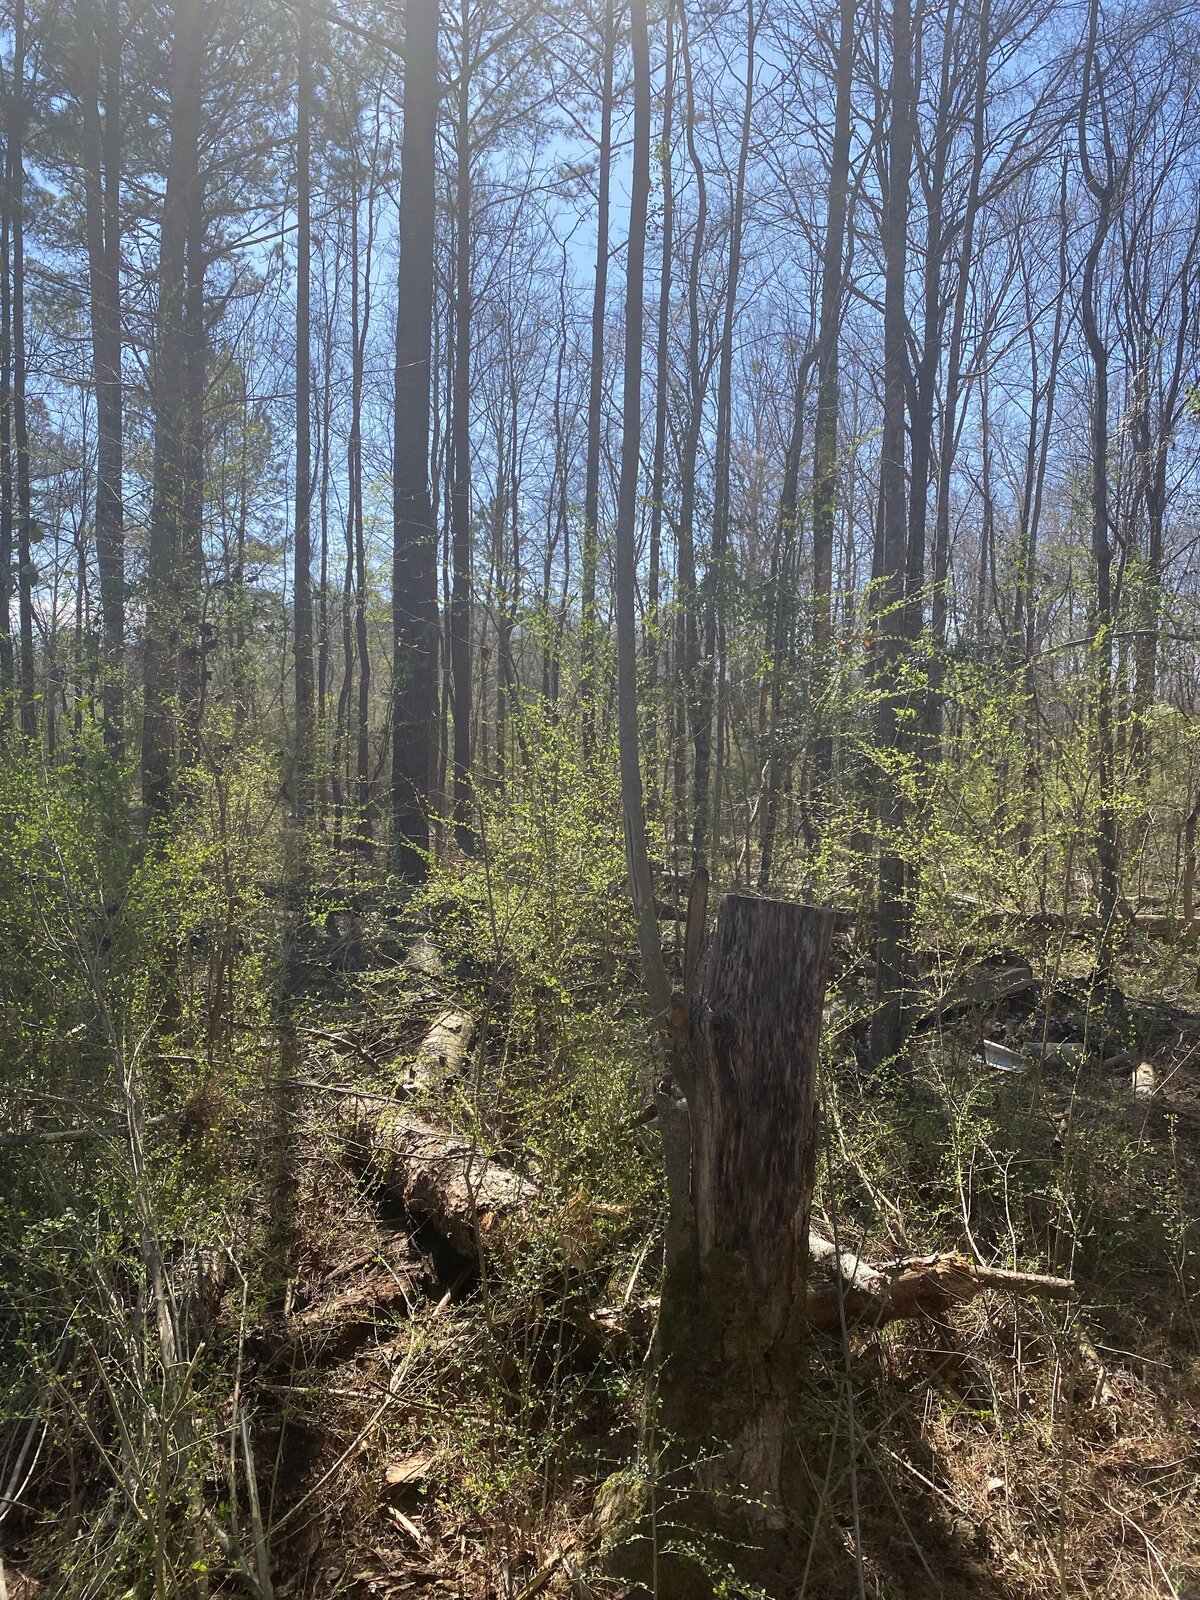 tree-stump-in-heavily-wooded-area-on-sunny-day